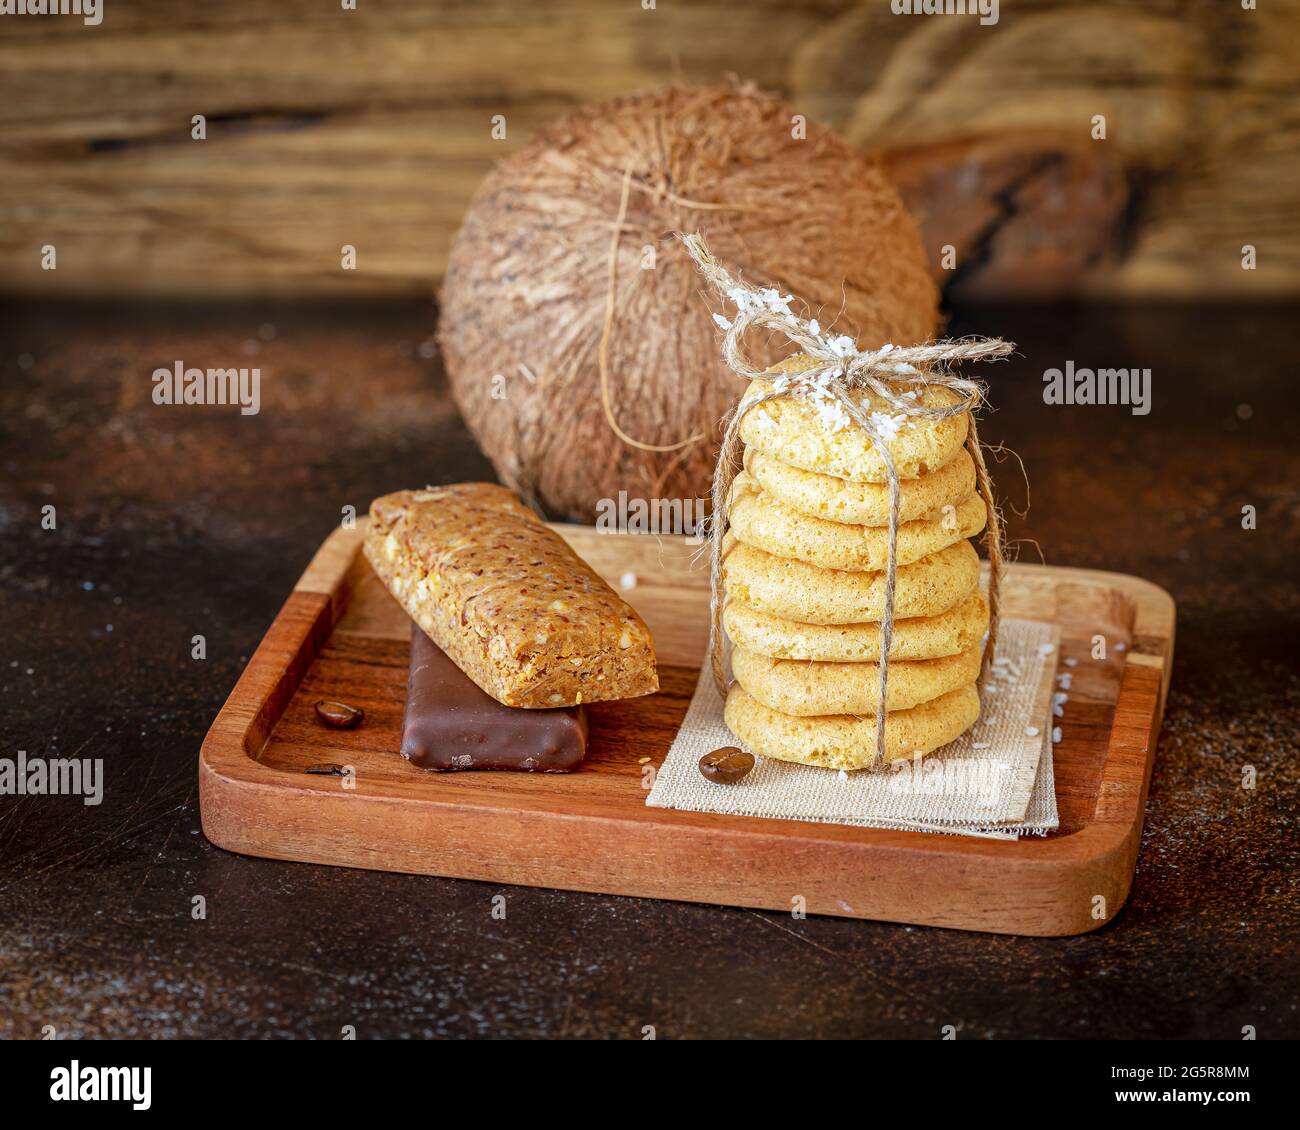 Homemade organic coconut cookies, diet candy bars and whole coconut on a wooden background. Gluten-free, low in carb sweets with coconut Stock Photo